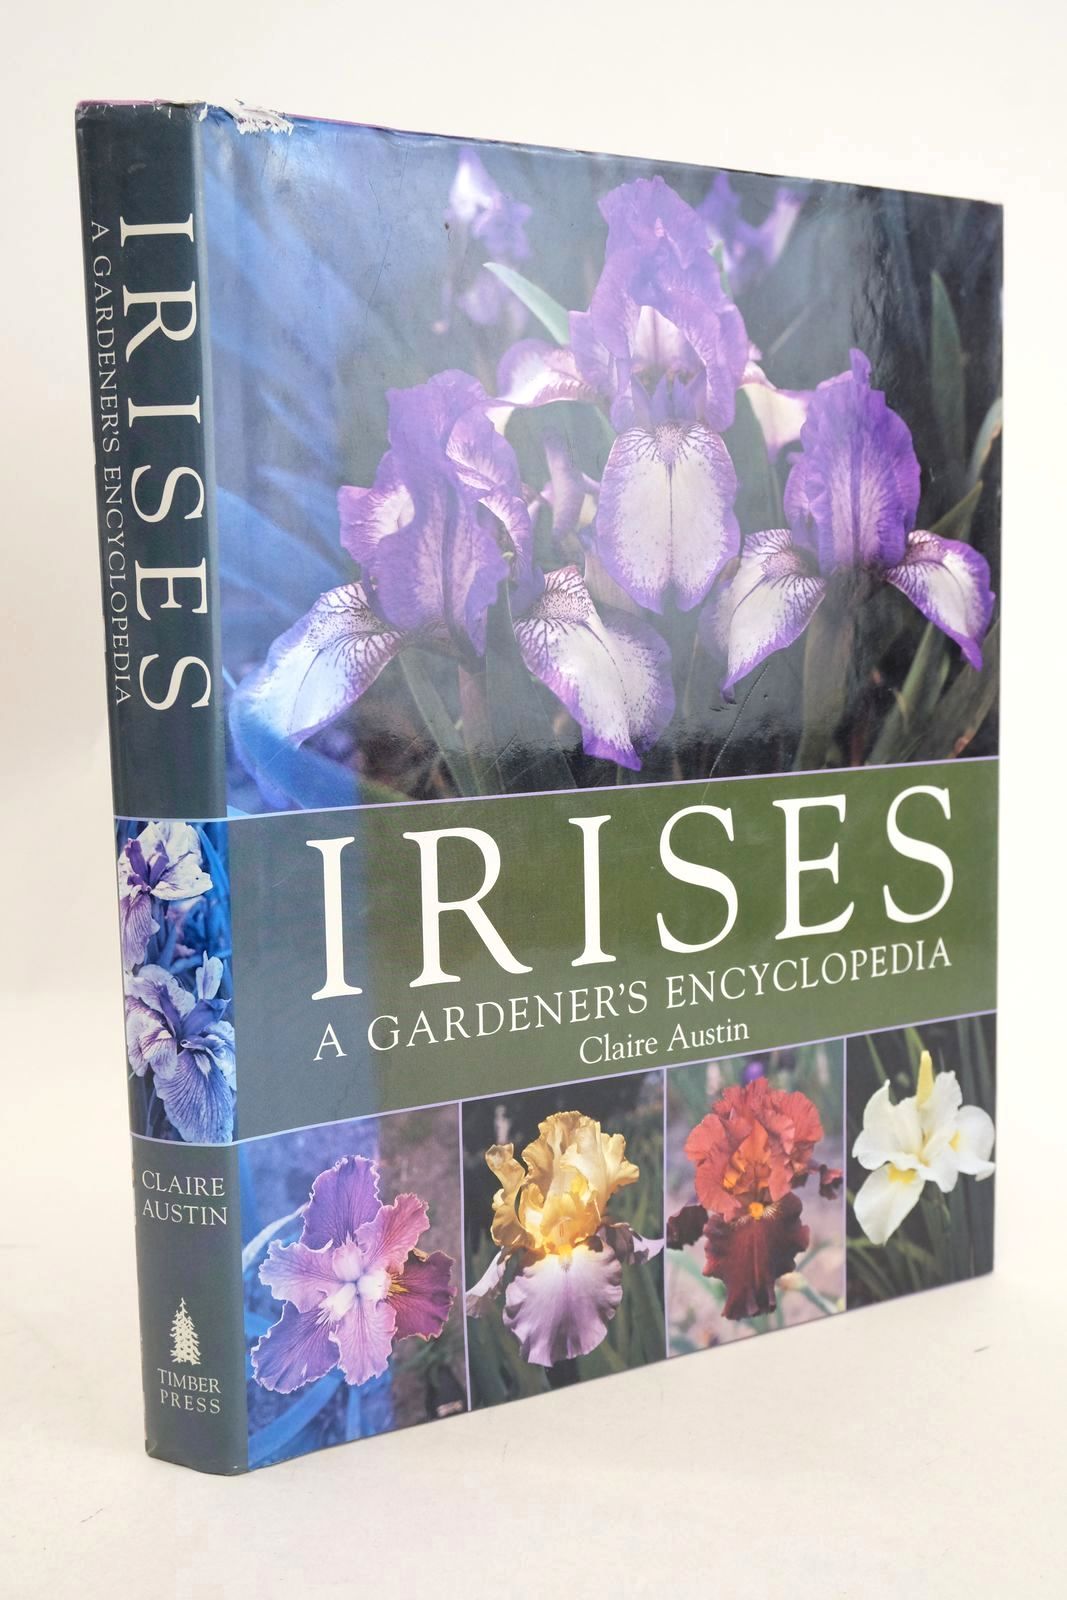 Photo of IRISES: A GARDENER'S ENCYCLOPEDIA written by Austin, Claire Waddick, James W. published by Timber Press (STOCK CODE: 1327027)  for sale by Stella & Rose's Books